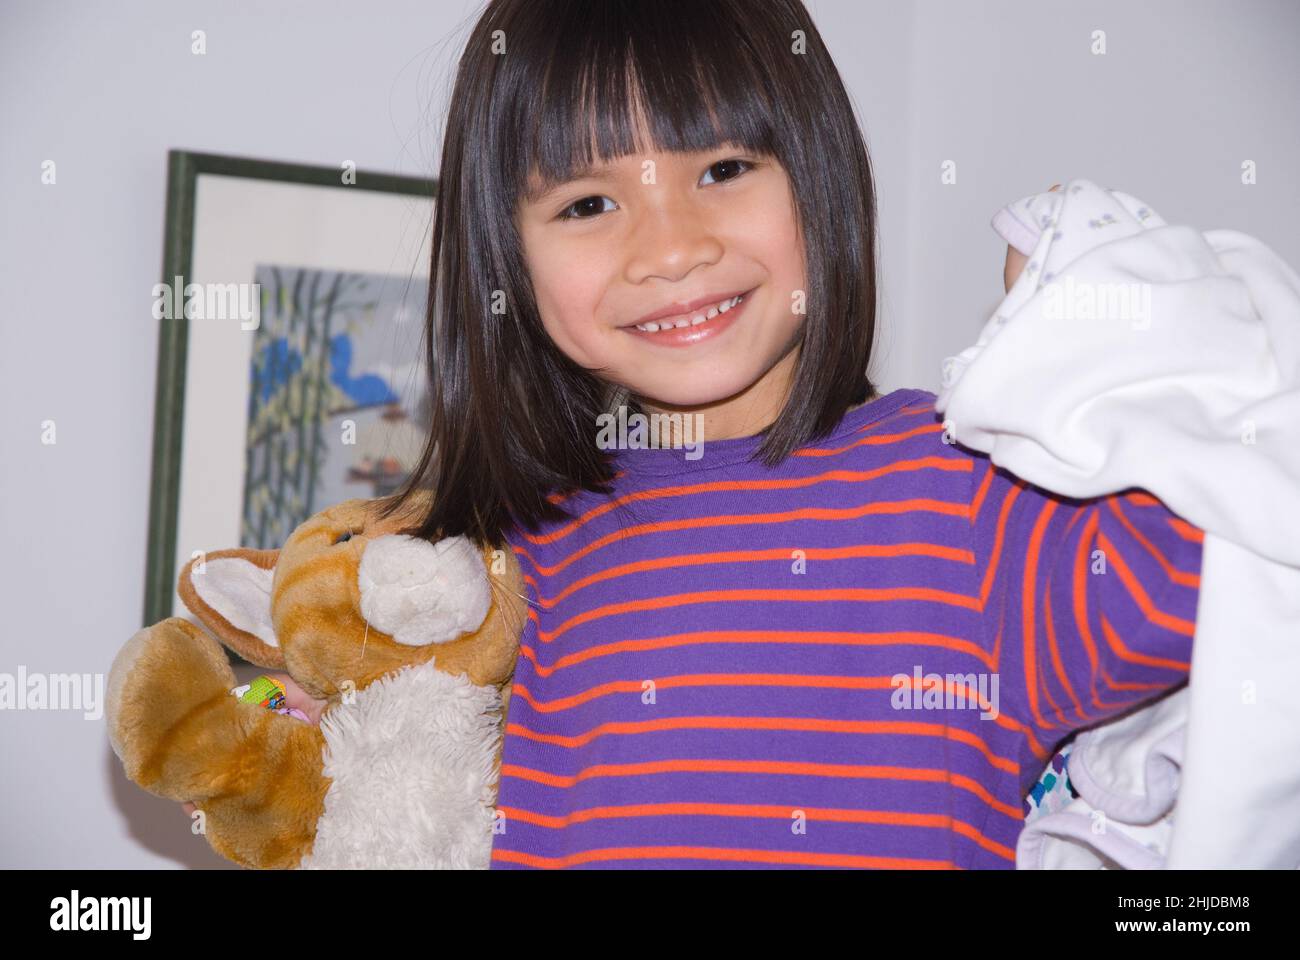 5 year old girl holding favorite stuffed toy animal and blanket Stock Photo